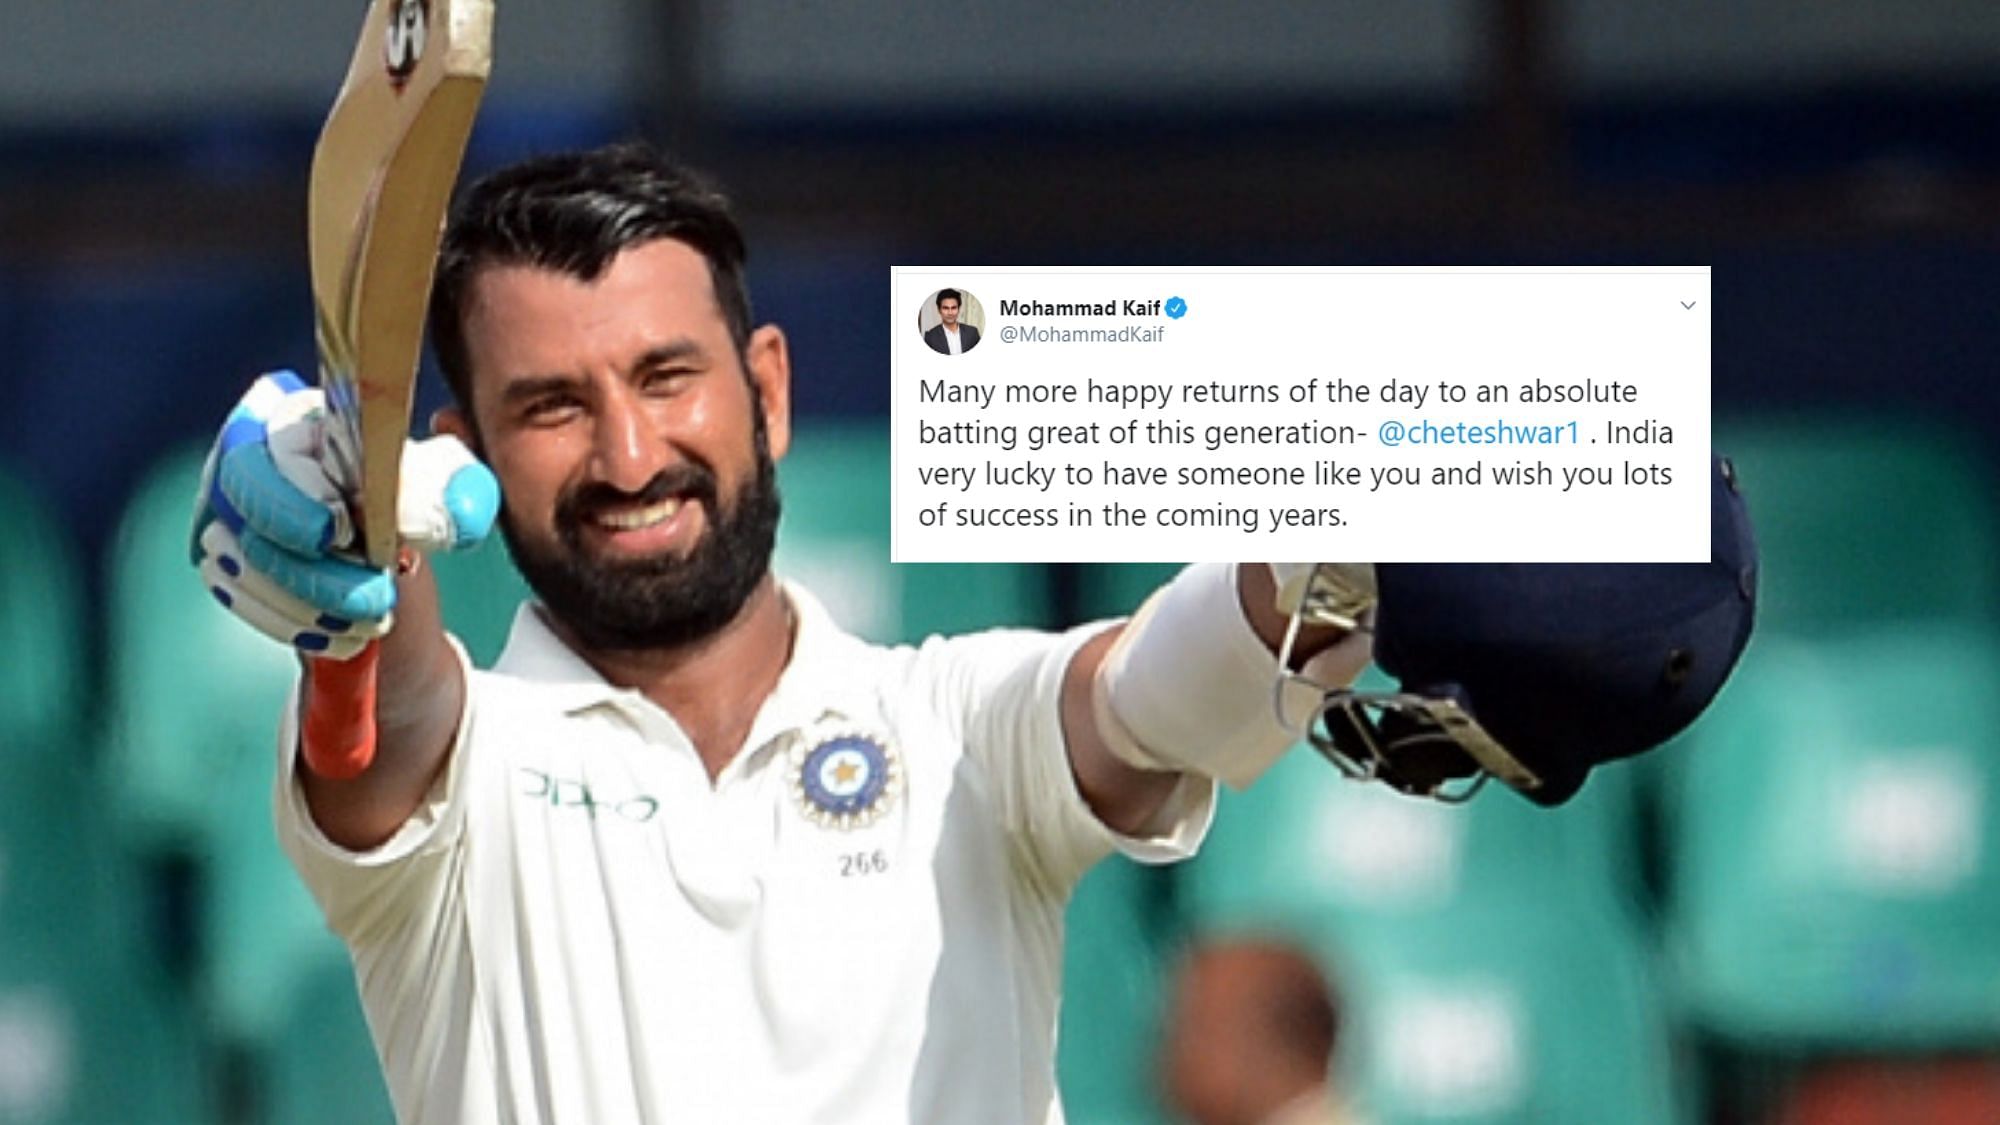 Cheteshwar Pujara on Saturday, 25 January turned 32 and on the occasion, the cricket fraternity came in unison to wish the batsman, who is India’s batting mainstay when it comes to Test cricket.